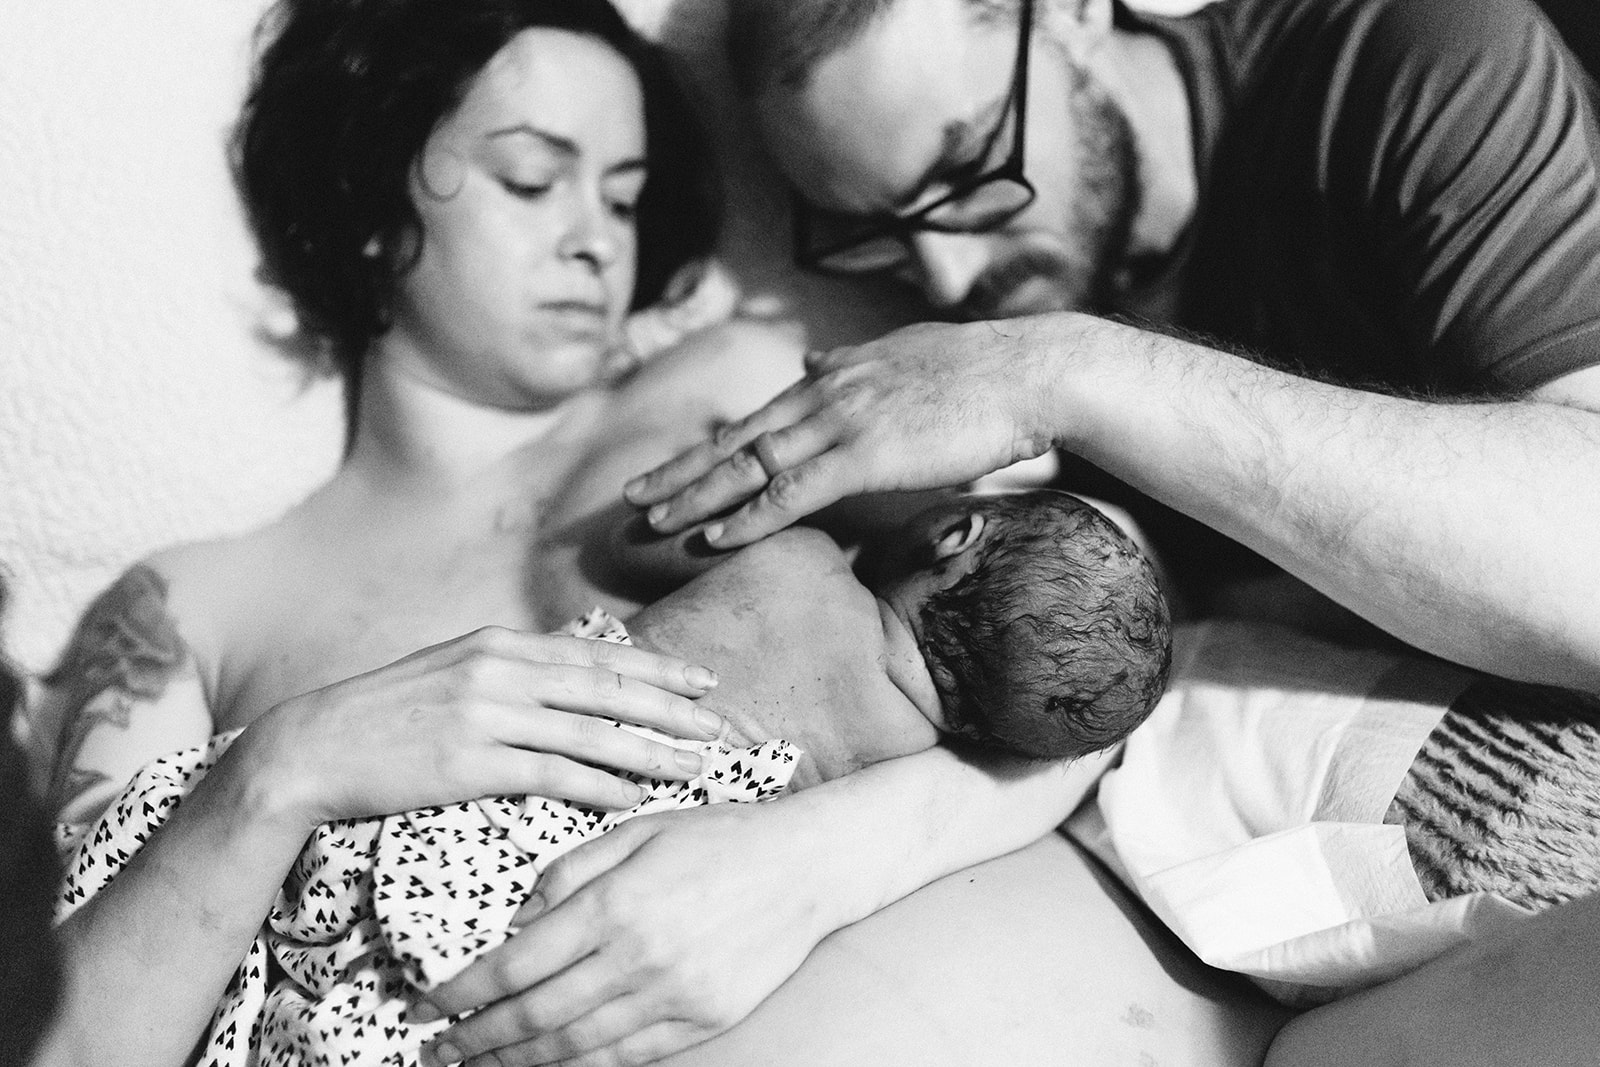 Parents greet their newborn baby moments after a home birth.